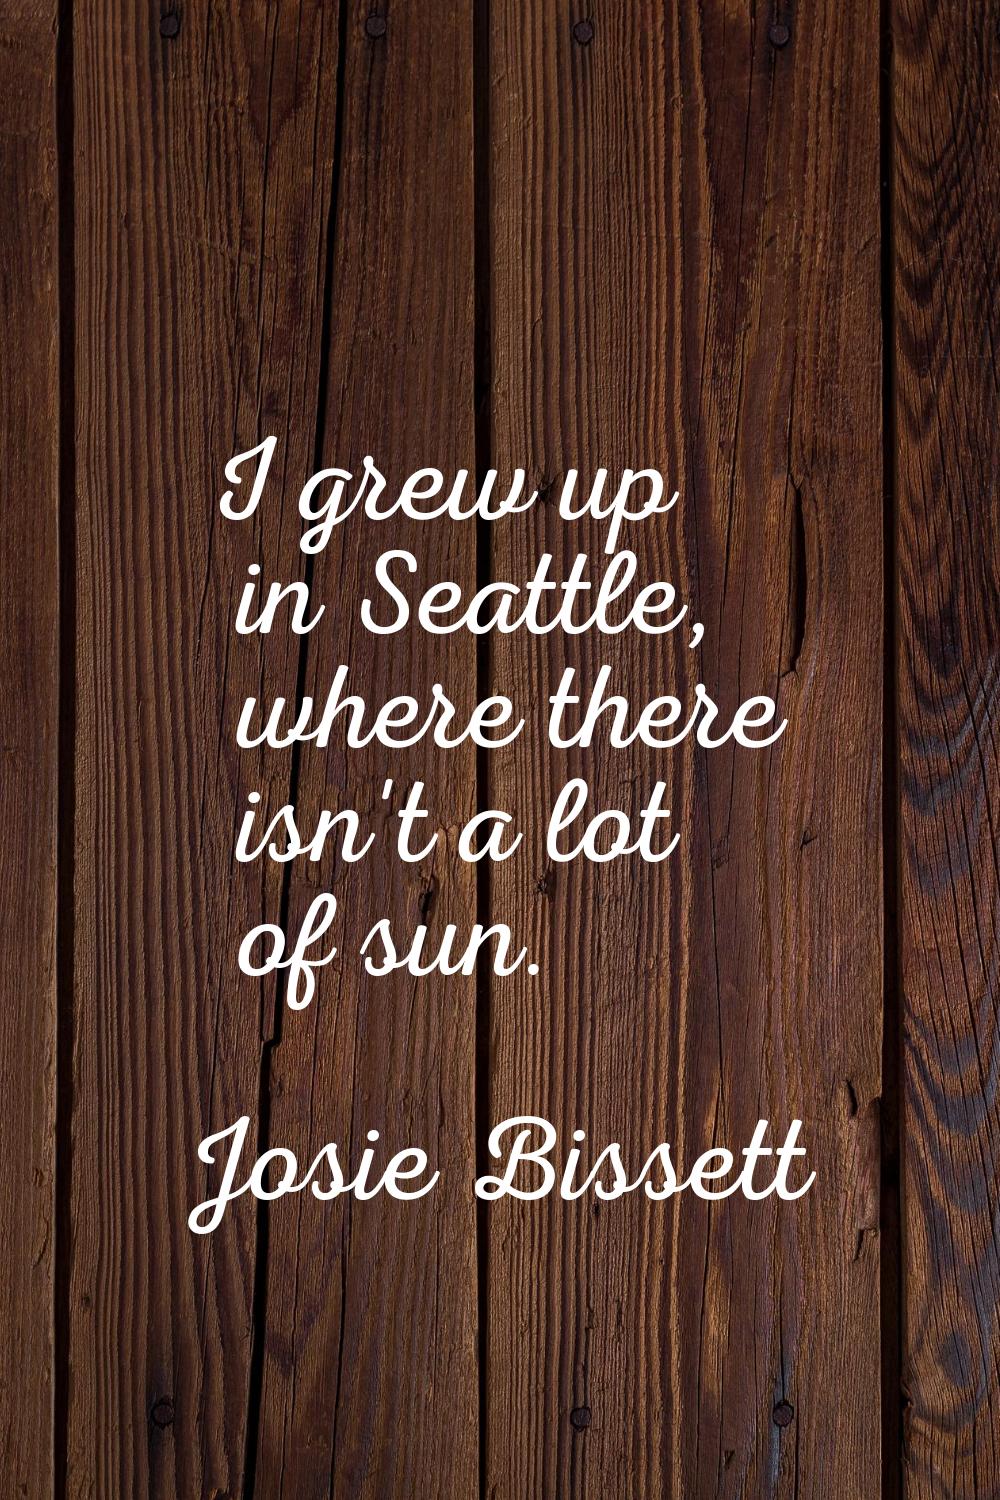 I grew up in Seattle, where there isn't a lot of sun.